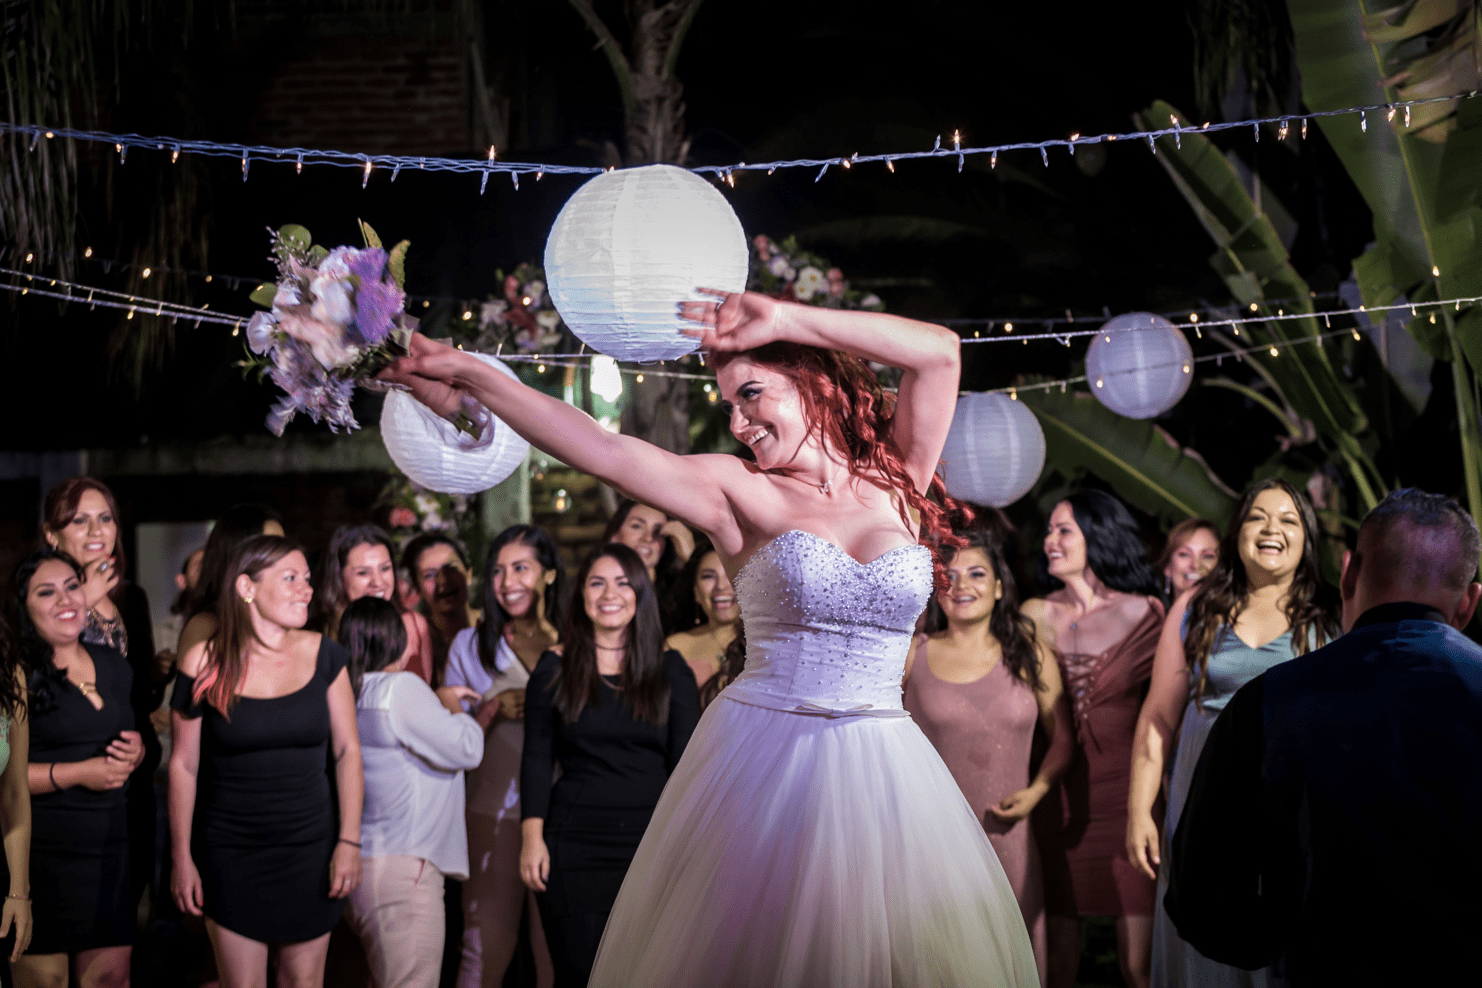 Why You Need To Have A Do-Not-Play Wedding Songs